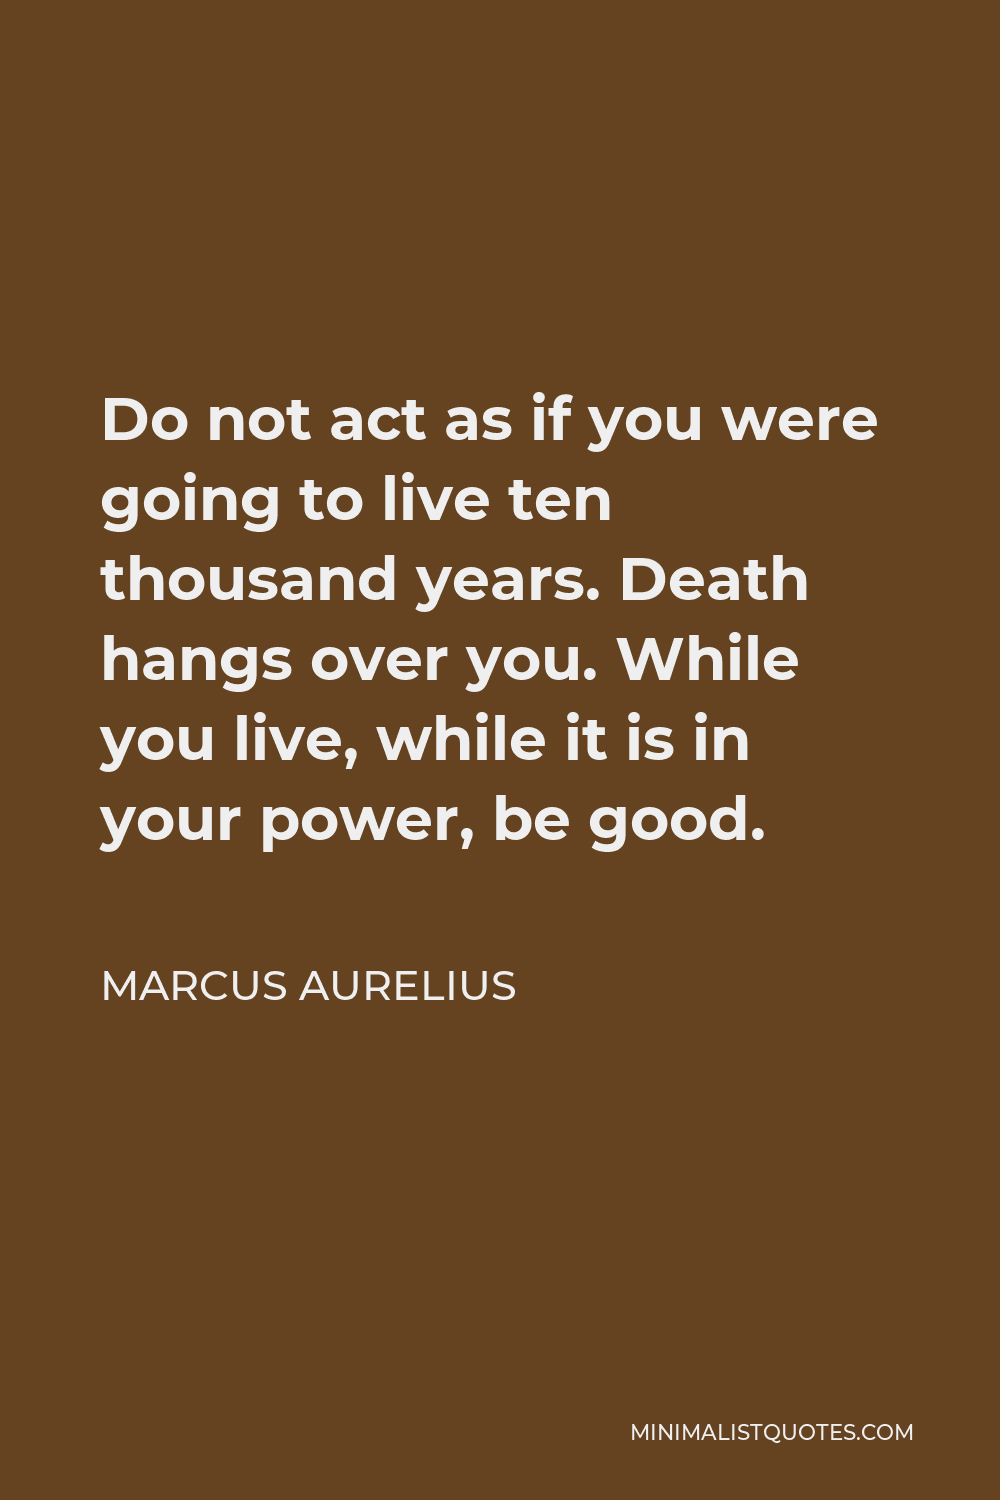 Marcus Aurelius Quote - Do not act as if you were going to live ten thousand years. Death hangs over you. While you live, while it is in your power, be good.